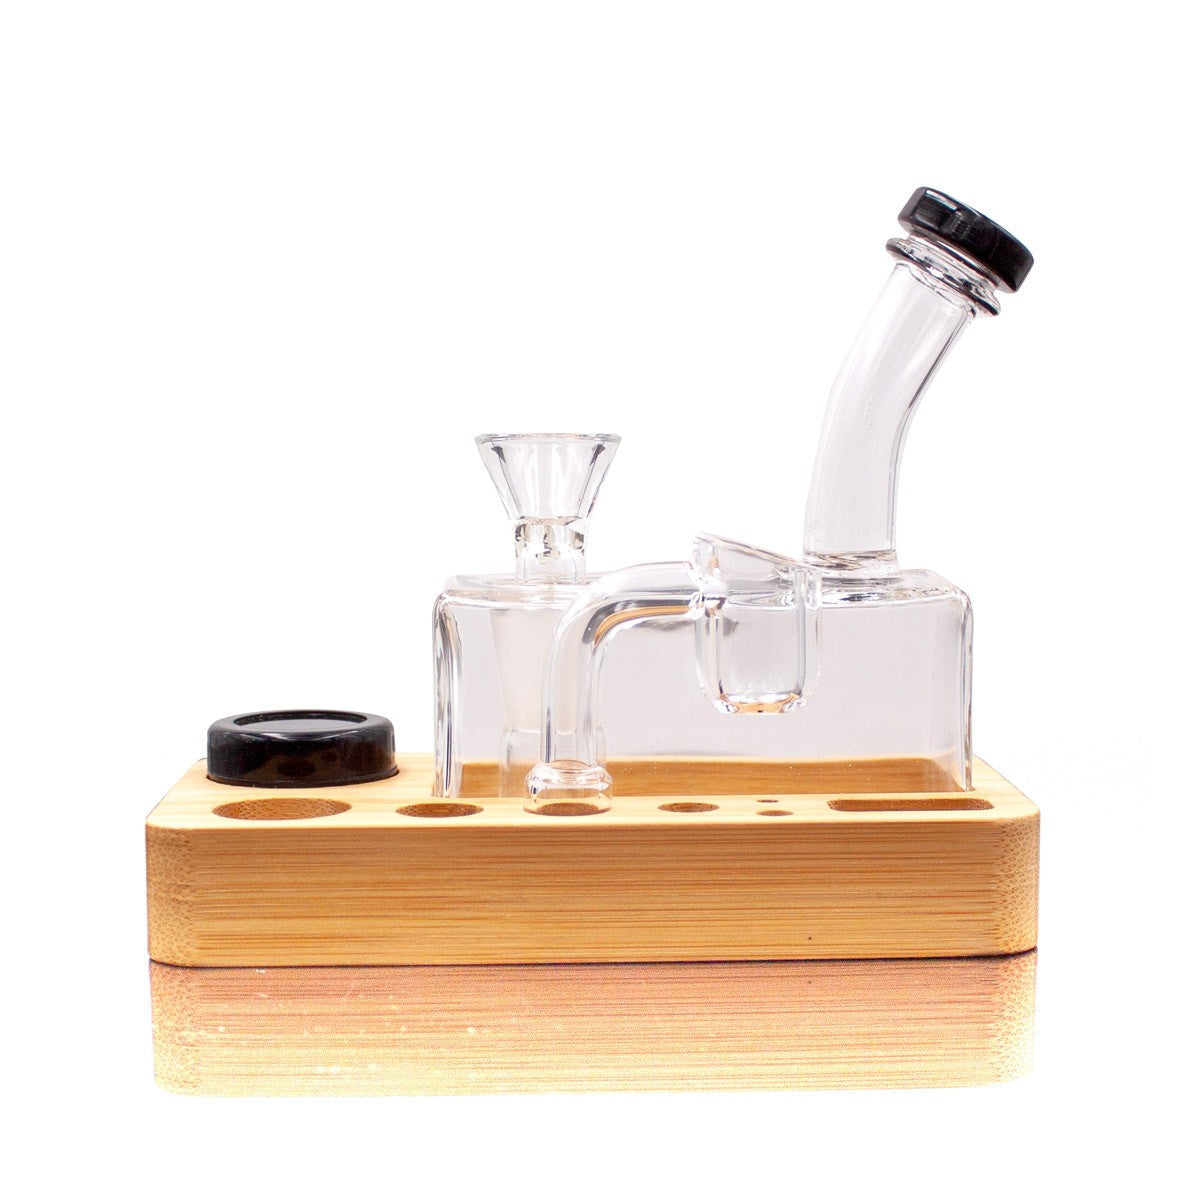 Dab Slab Mini Water Pipe Tray by The Stash Shack with glass recycler and storage compartments